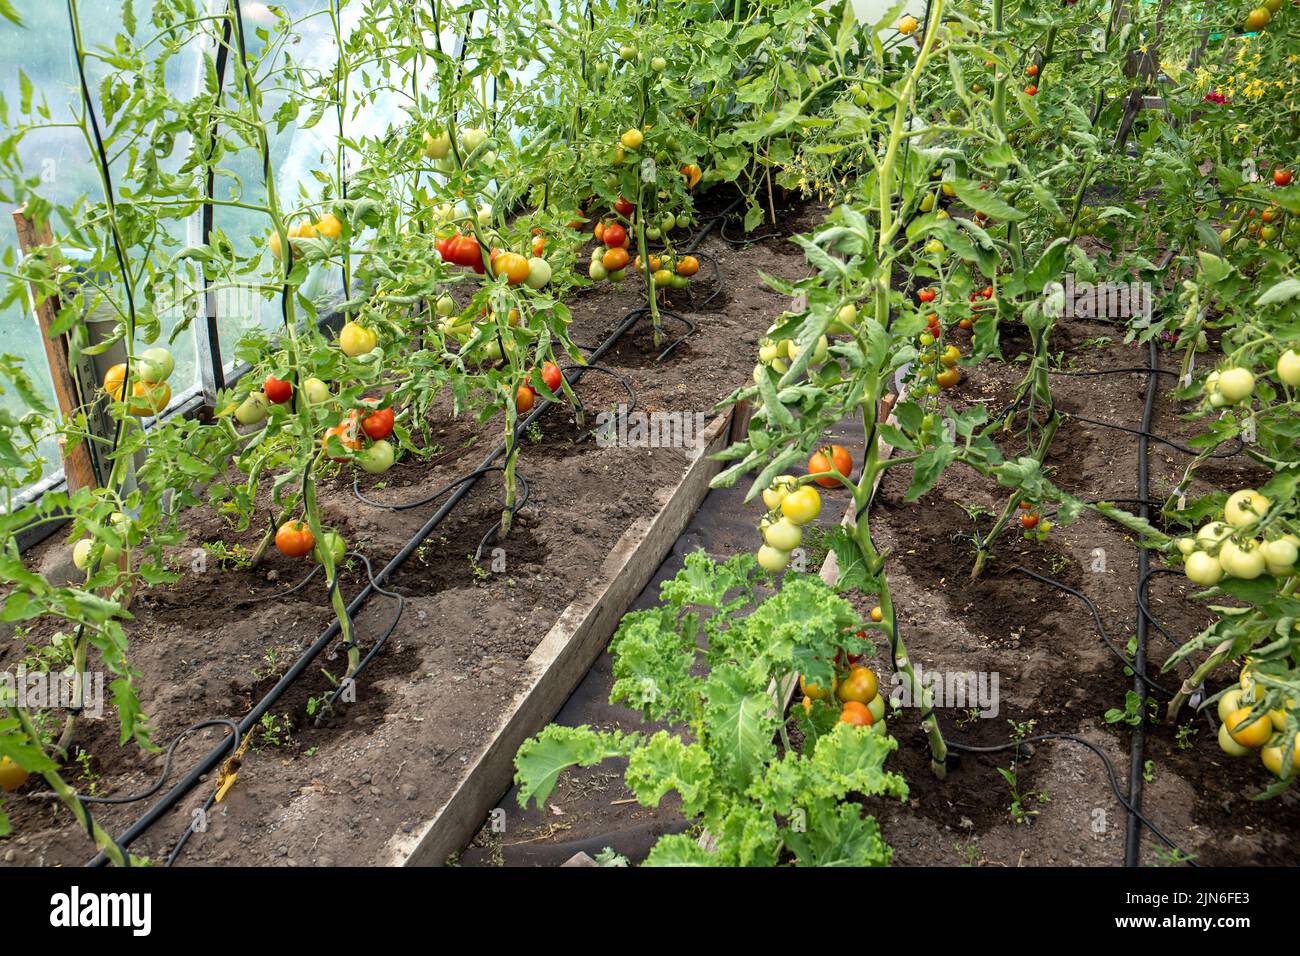 Water dripping system in home vegetable garden watering tomato plants in greenhouse. Home use water drip irrigation system. Ripe tomatoes on stem. Stock Photo